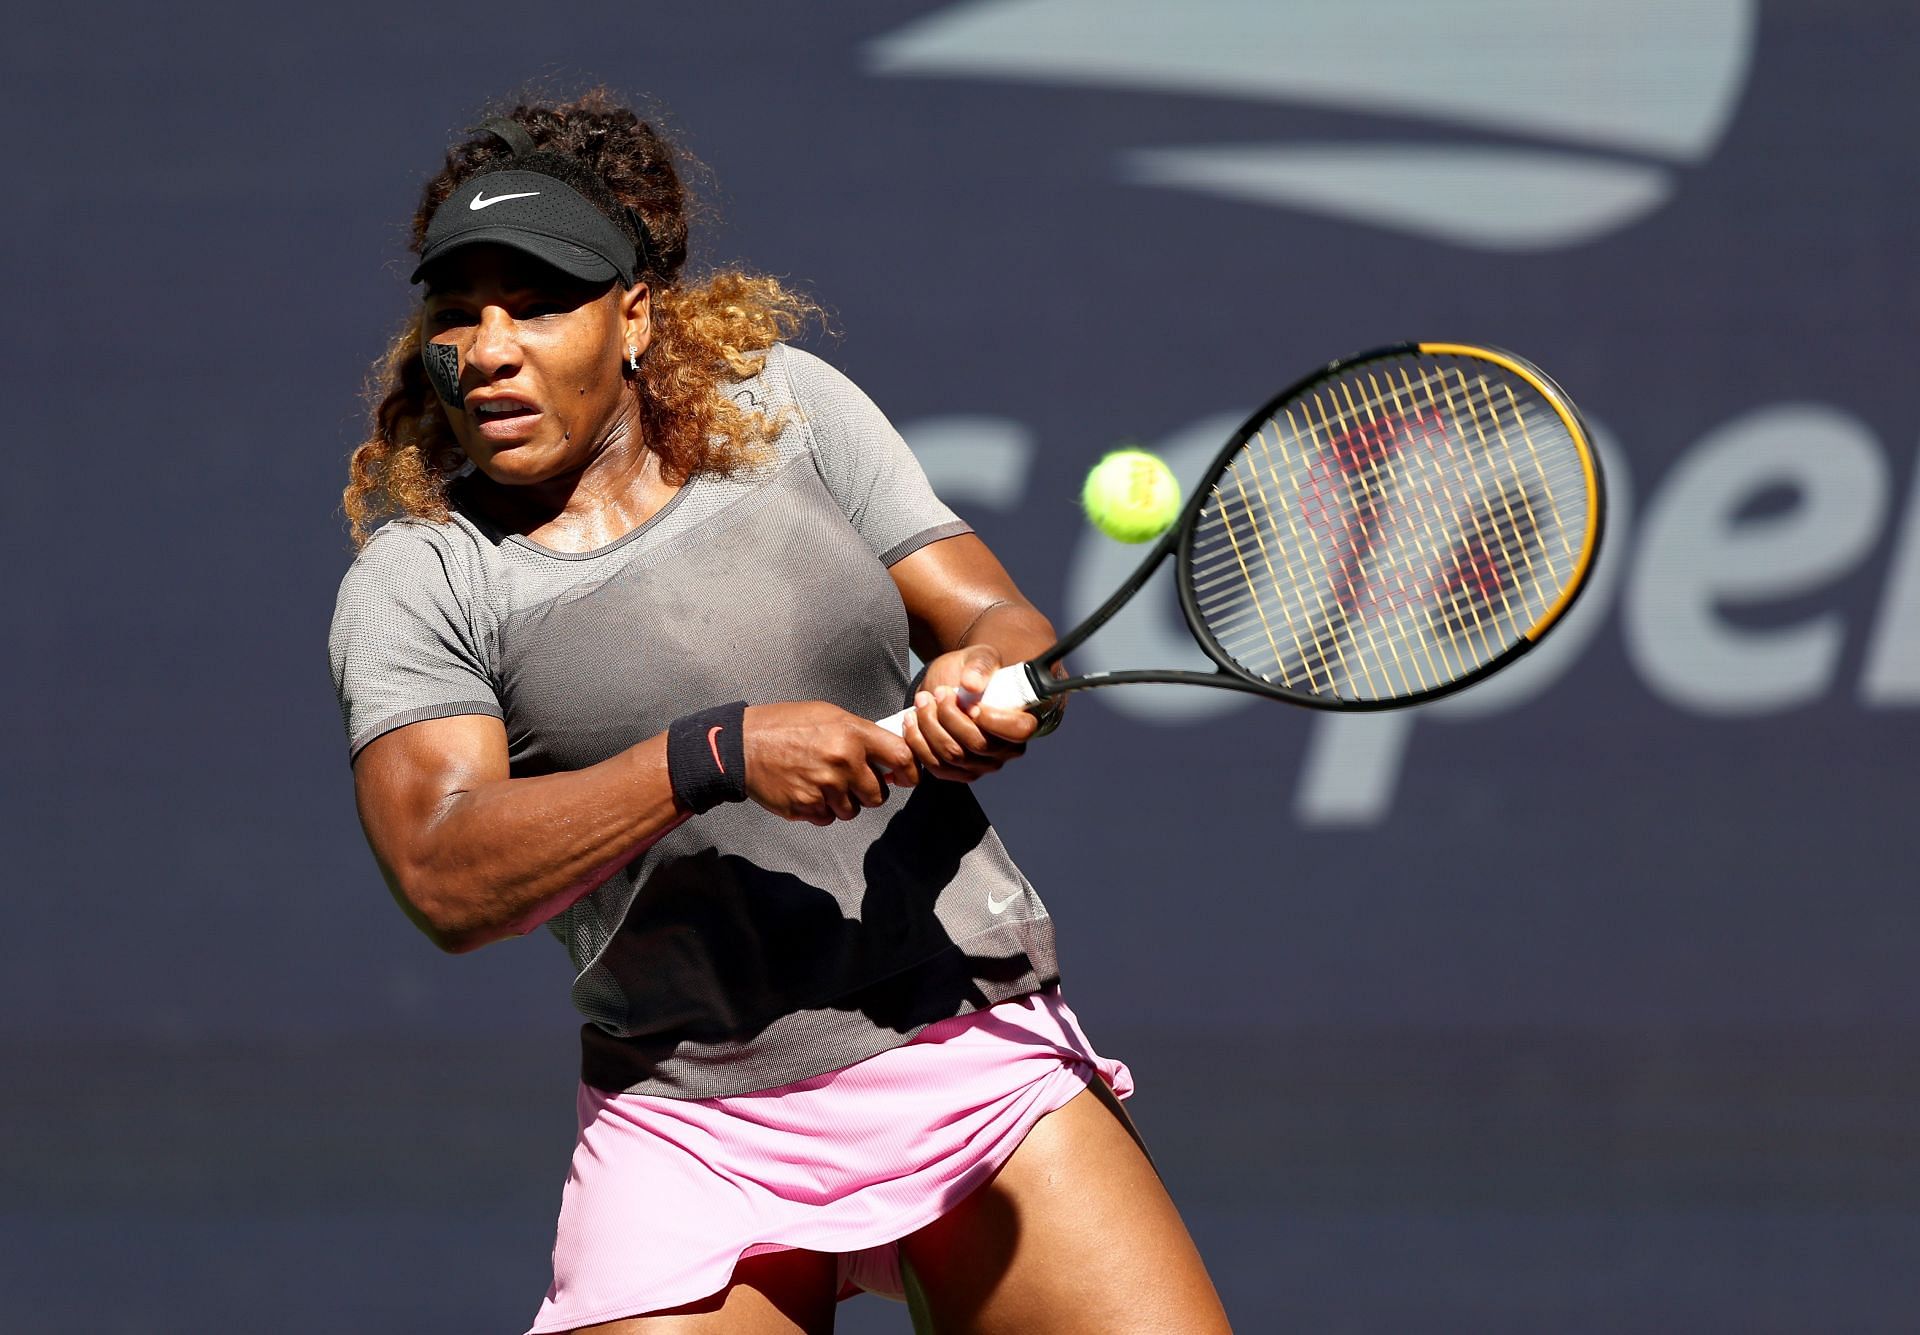 Serena Williams practices ahead of her 2022 US Open campaign.